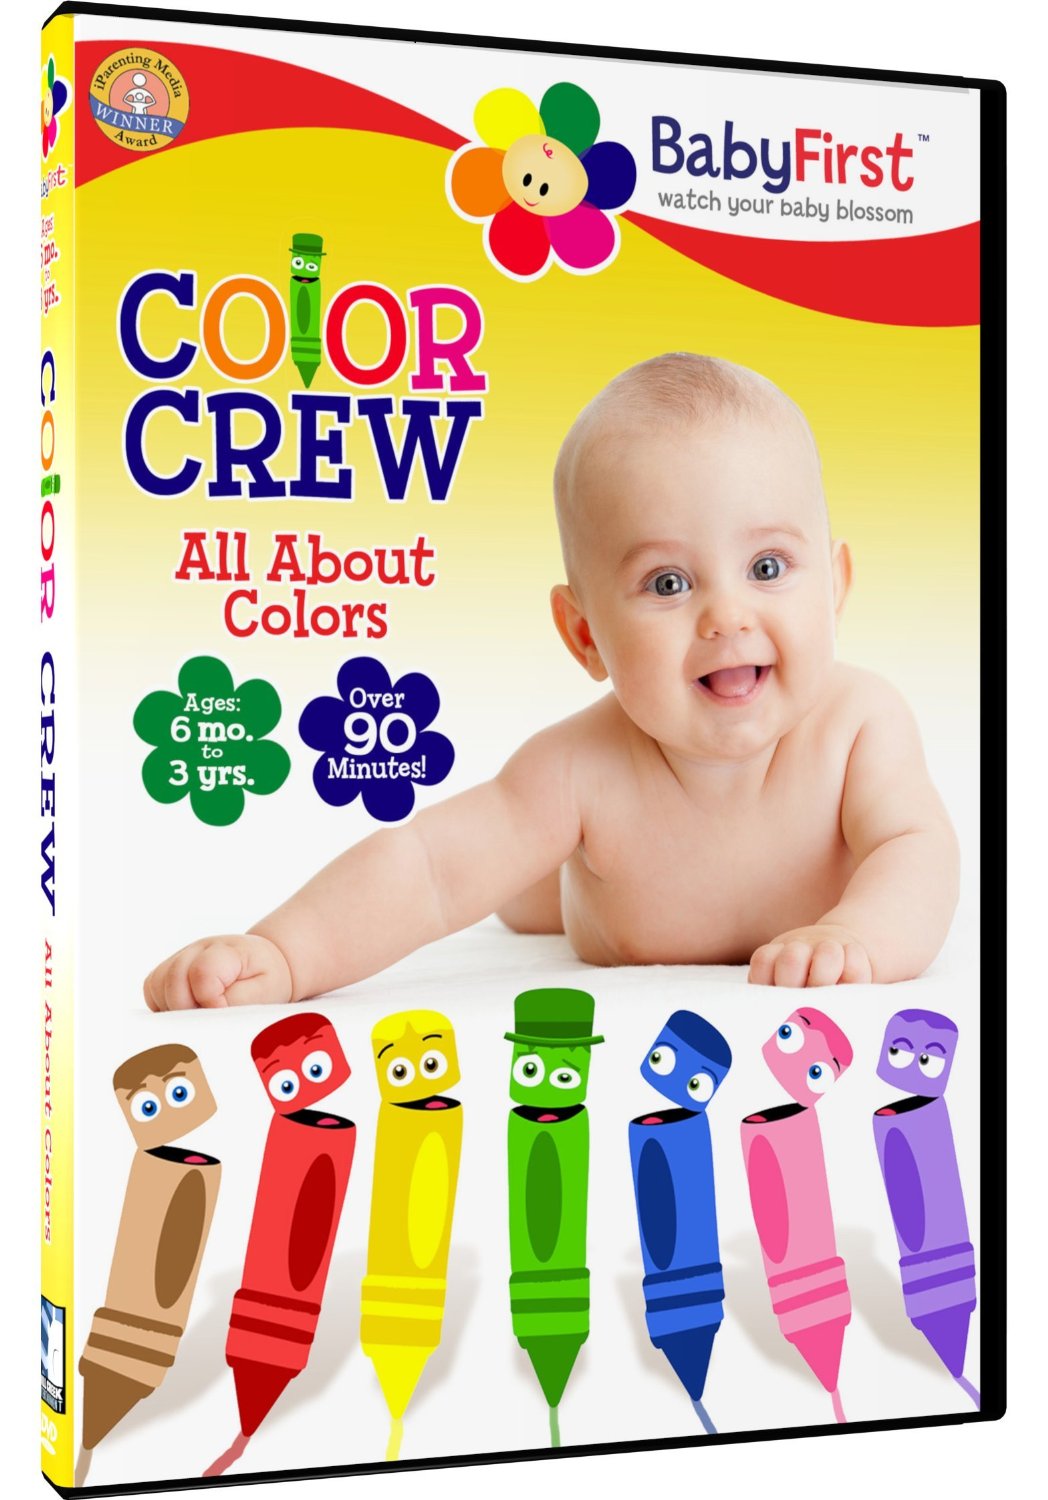 discover how to avoid unexpected costsBlue's Clues Shapes and Colors D...